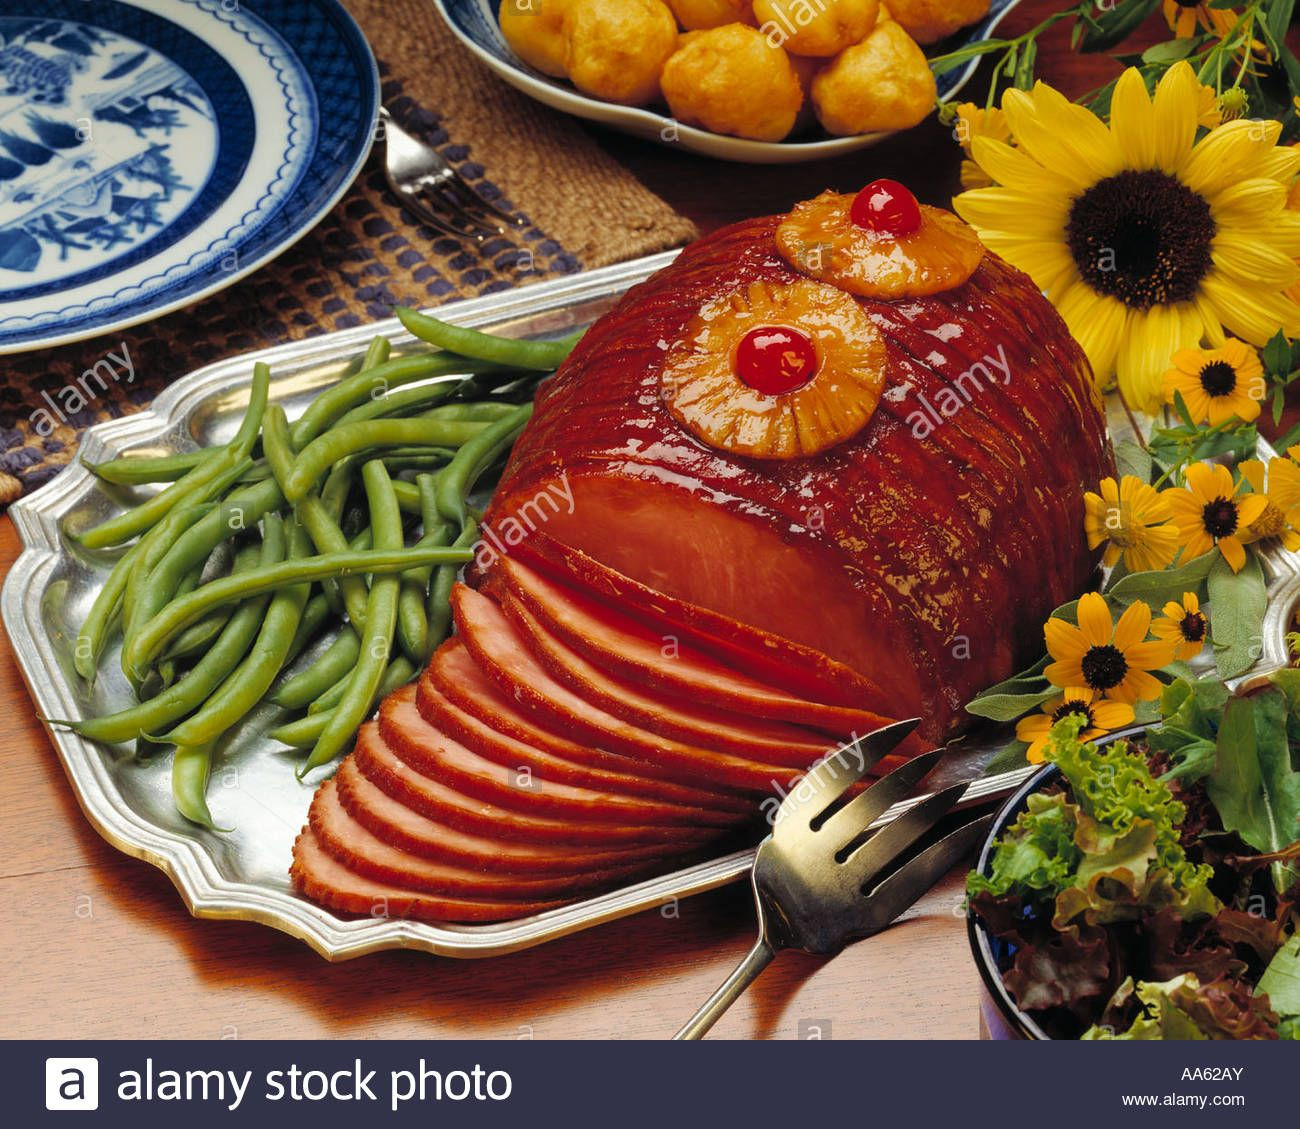 Pre Cooked Thanksgiving Turkey Dinners
 Fully Cooked Whole Spiral Ham Dinner Platter Garnish